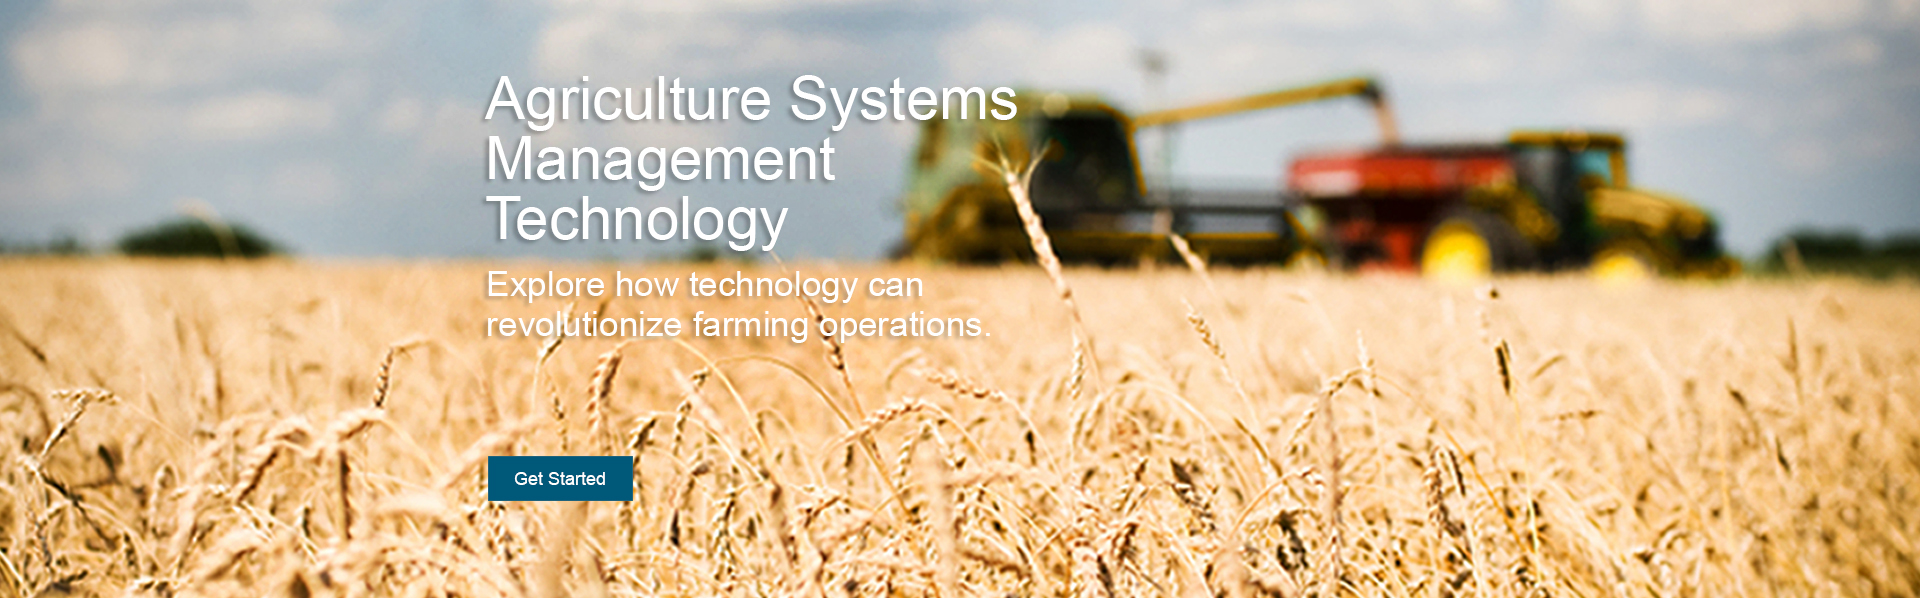 A golden wheat field during harvest. This online course share explores how technology can revolutionize farming operations from renewable energy, ag and food safety, grain preservation, and machinery management and technology.